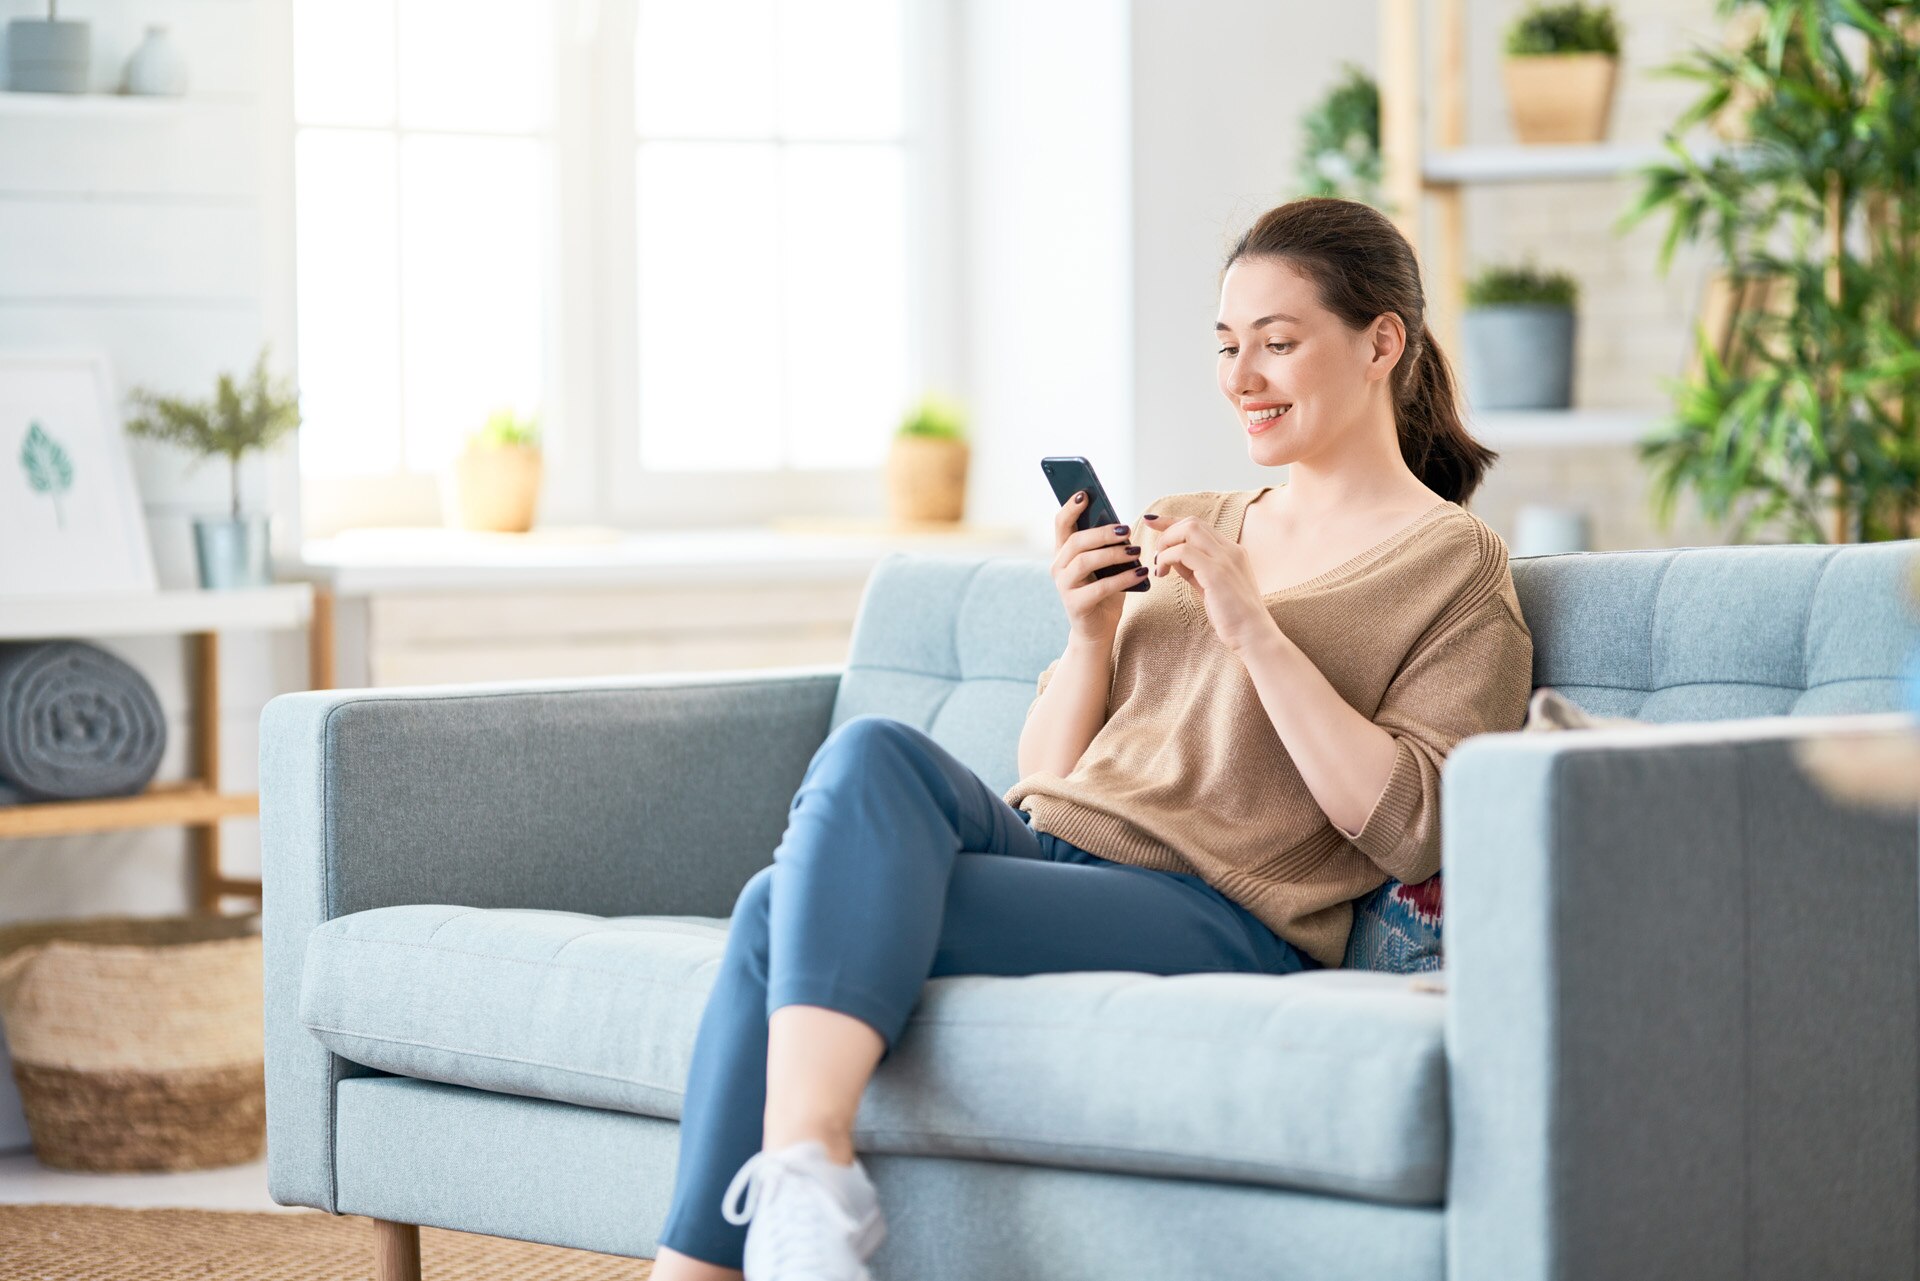 Happy casual beautiful woman is talking on a phone sitting on a sofa at home.; Shutterstock ID 1422270389; purchase_order: -; job: -; client: -; other: -